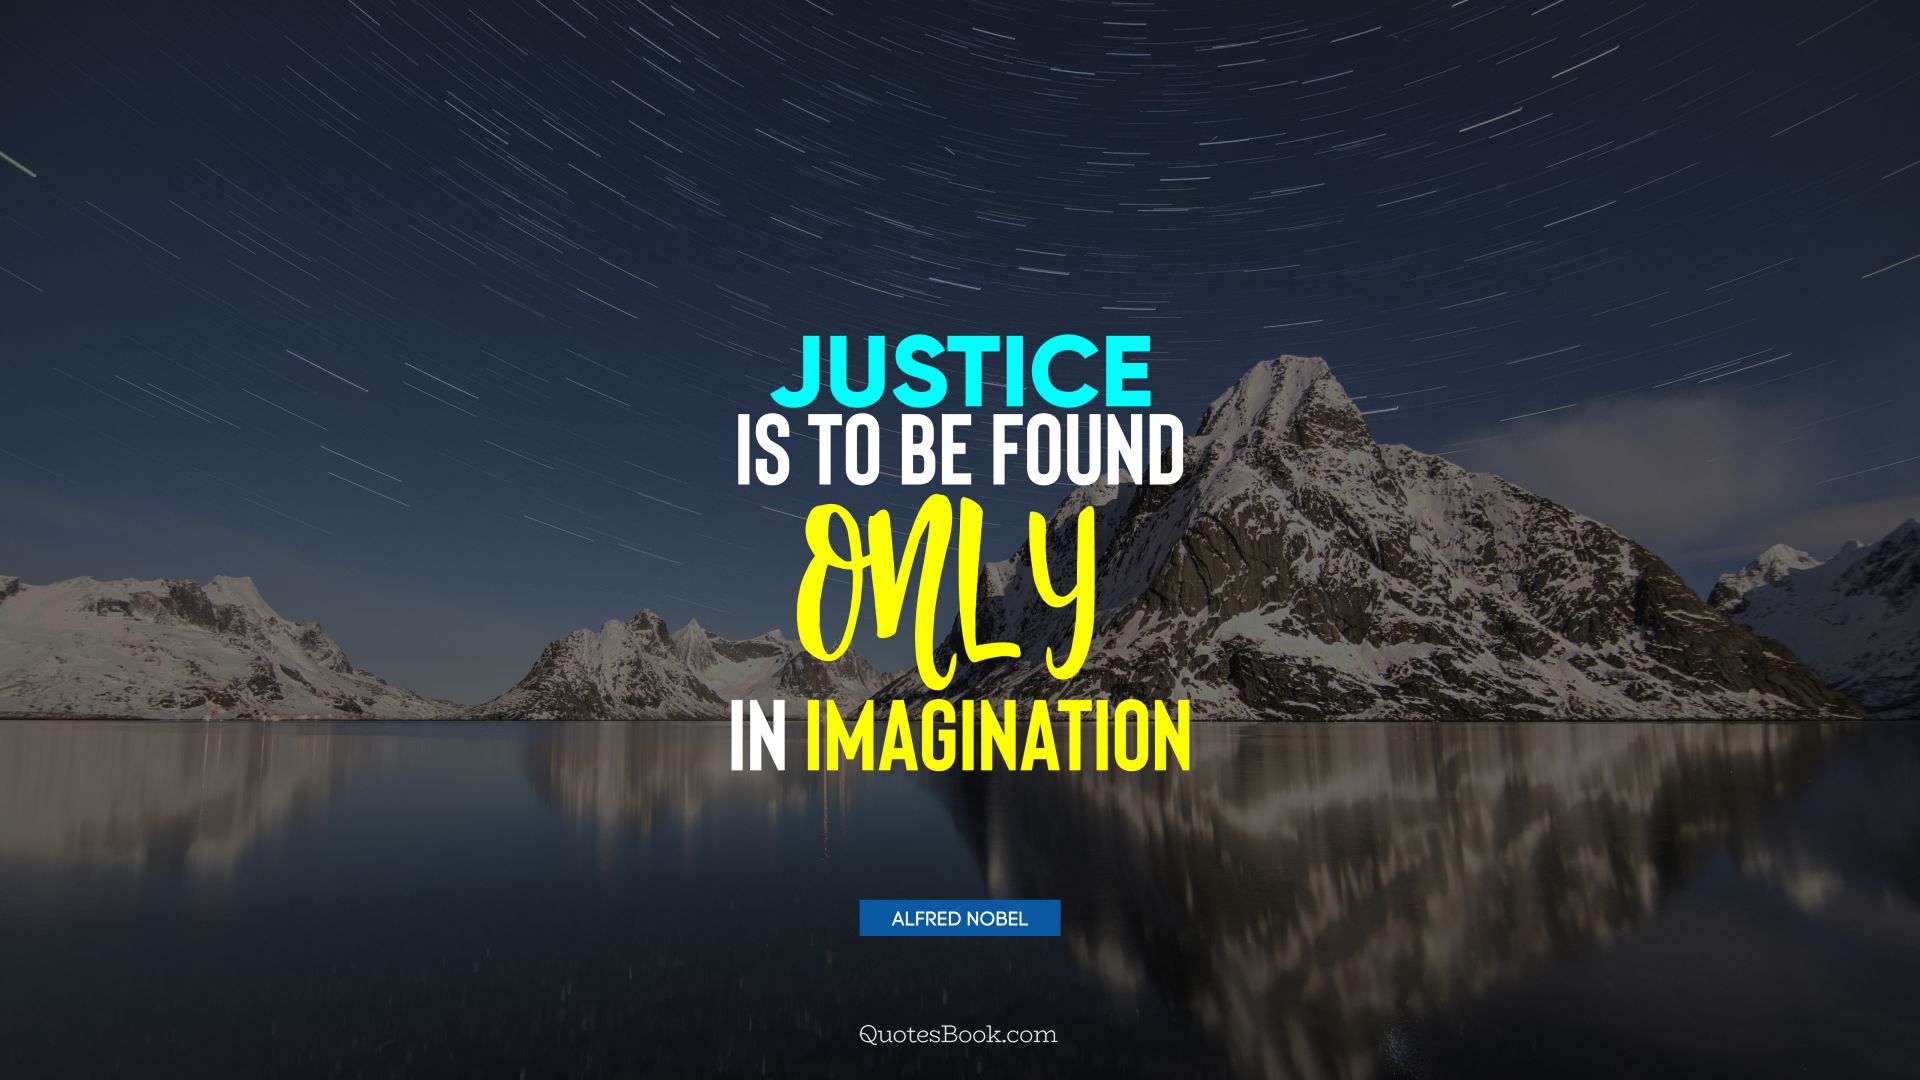 Justice is to be found only in imagination. - Quote by Alfred Nobel